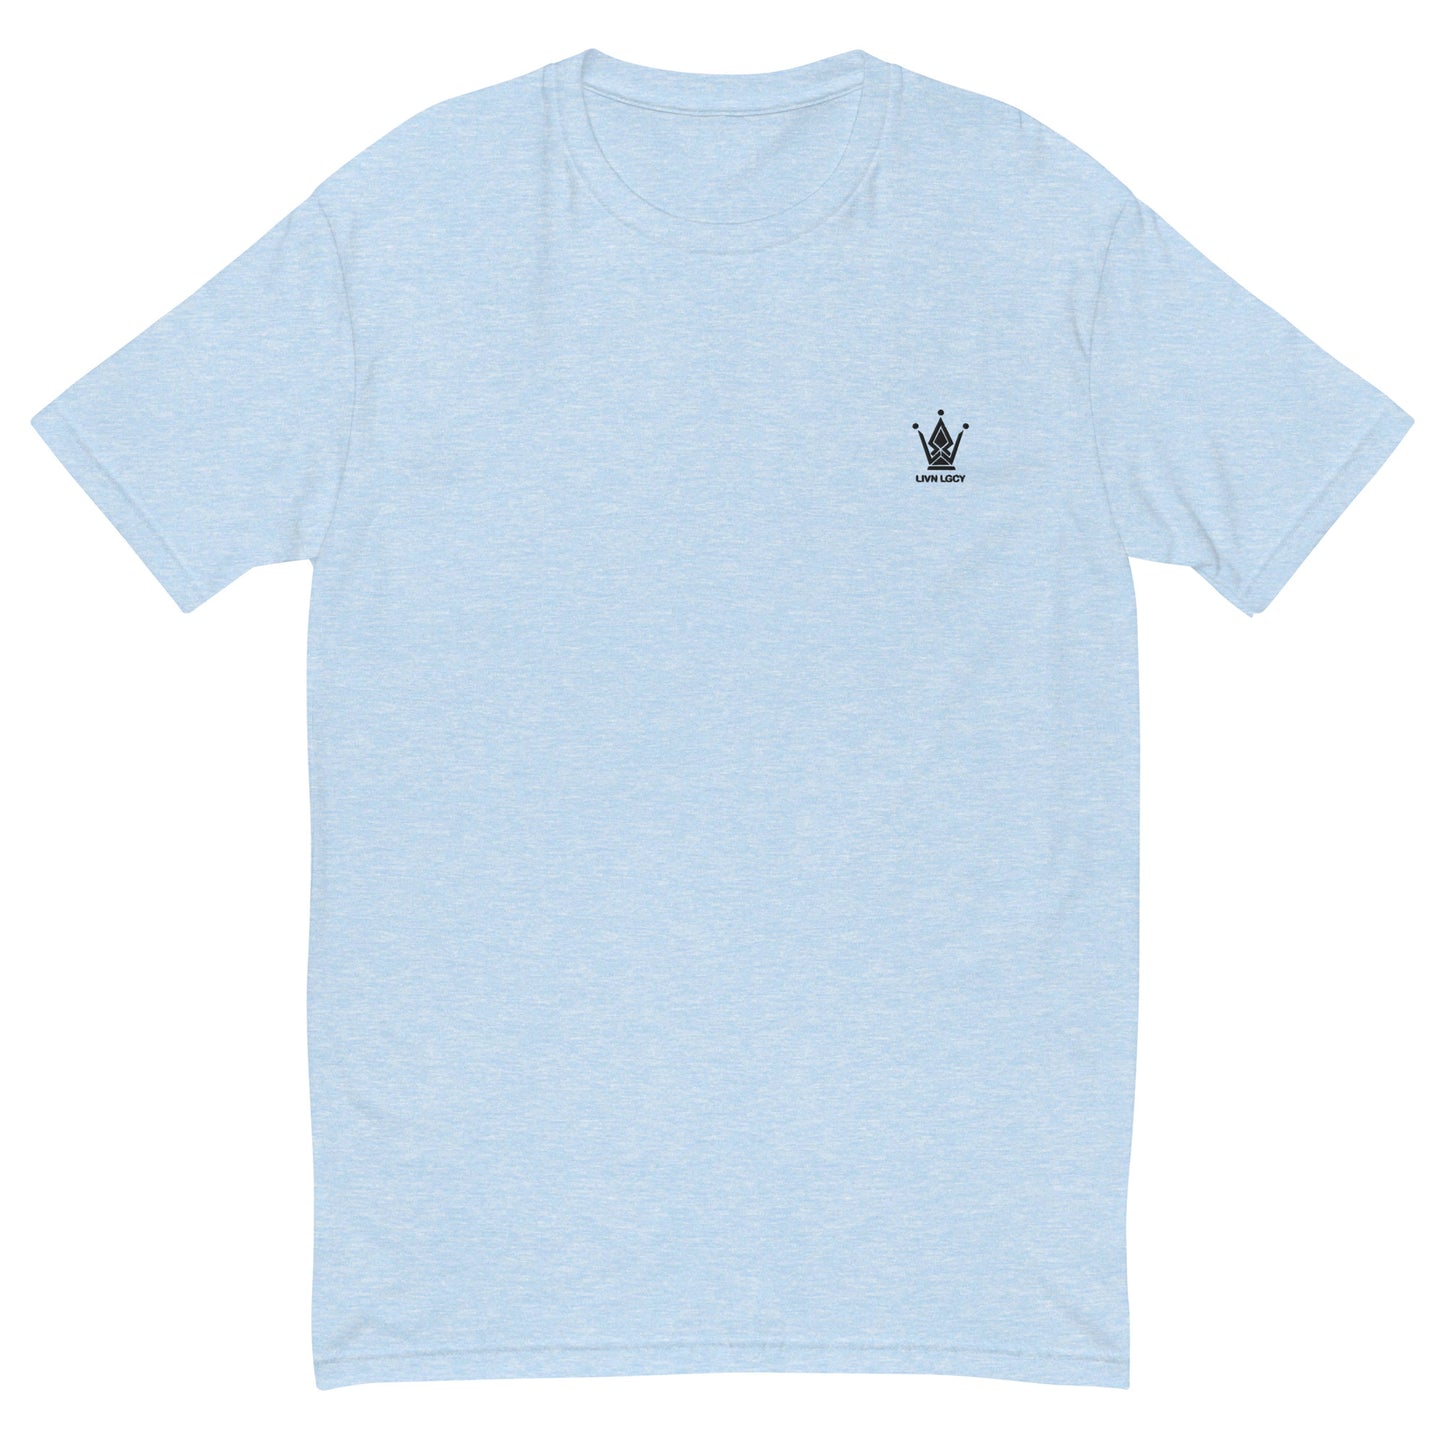 Sky Blue Fitted Emblem Tee